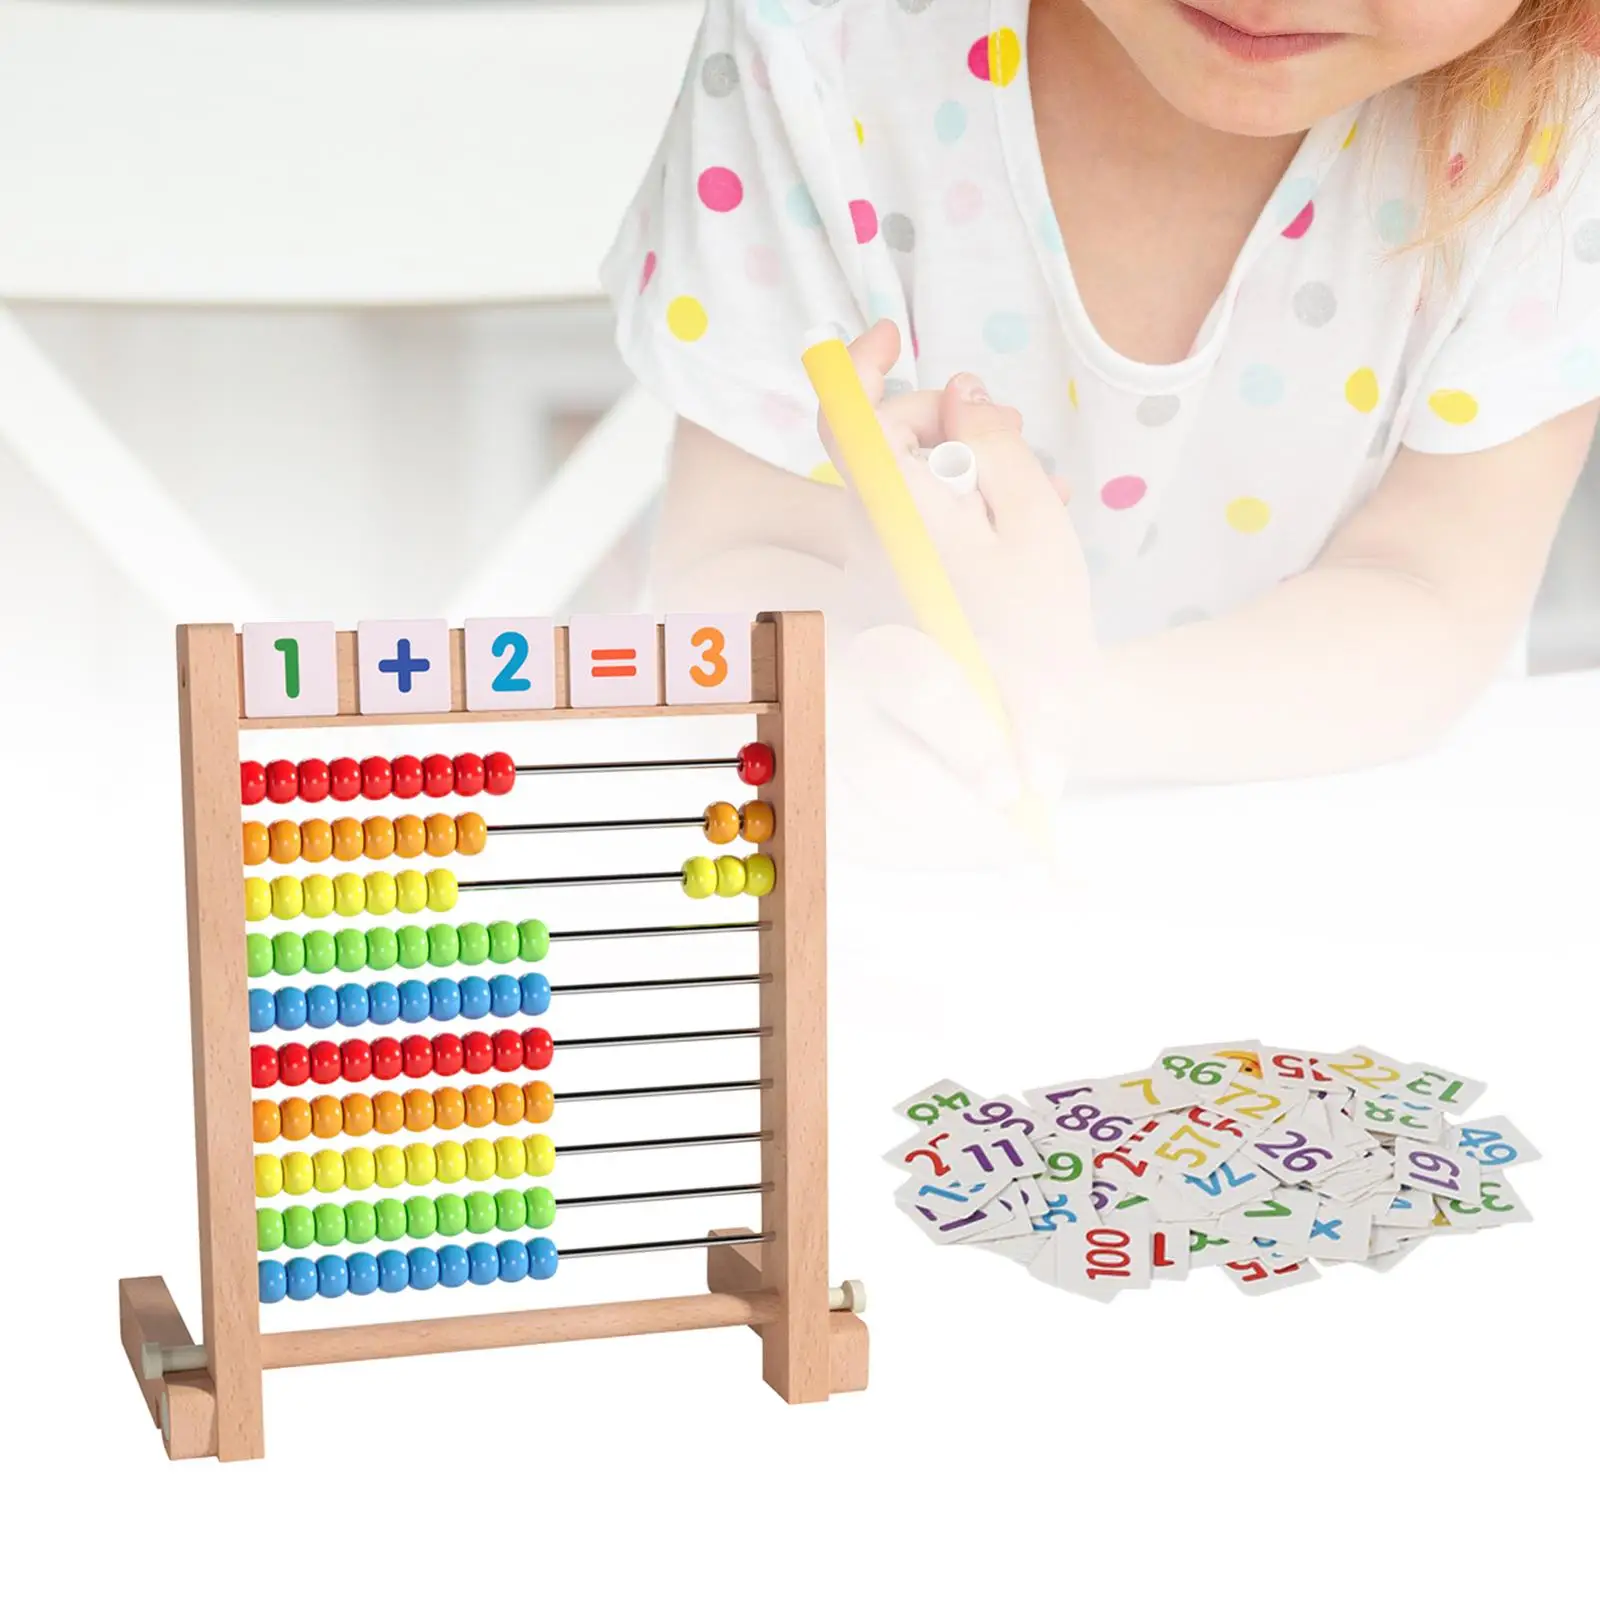 Add Subtract Abacus Ten Frame Set with Number Cards Educational Counting Toy for Elementary Toddlers Kids Kindergarten Learning